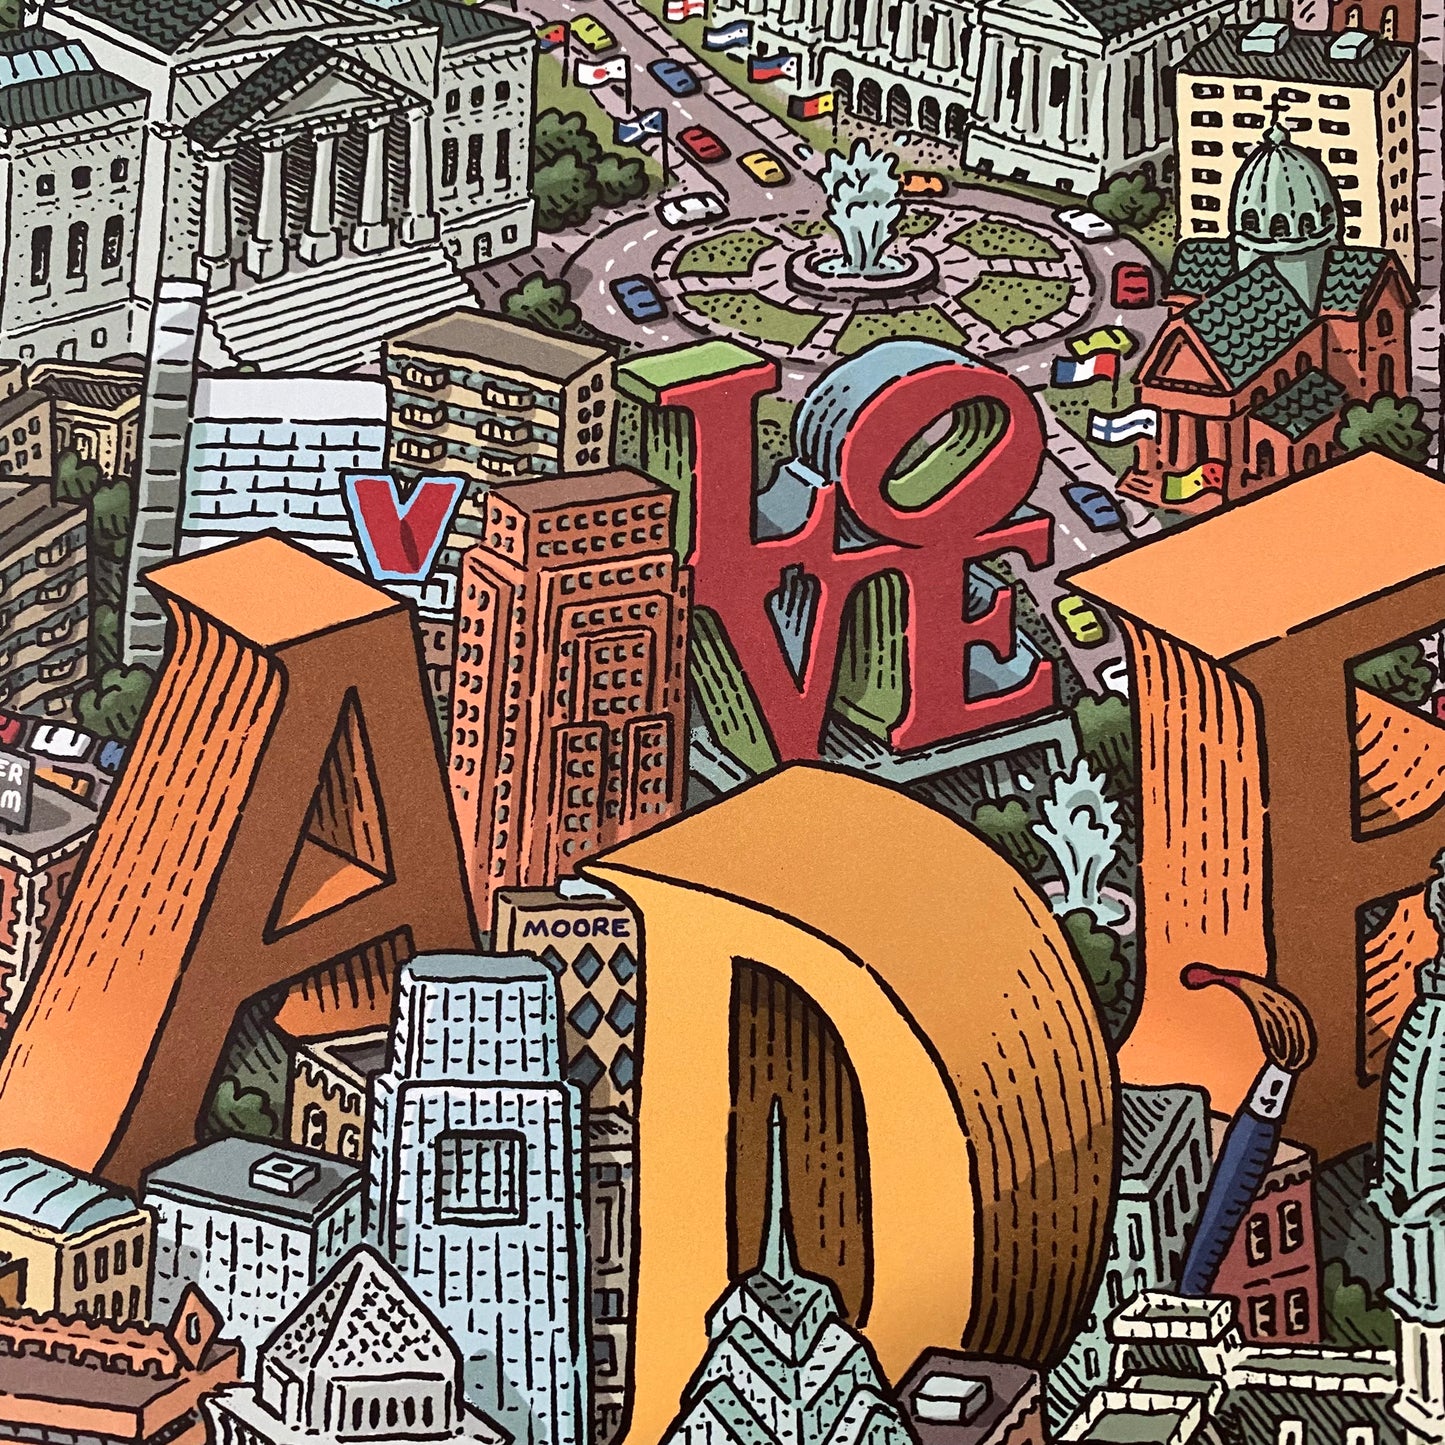 Colorful illustration of an urban scene with buildings and a "love" sculpture, prominent in the foreground, inspired by Philly landmarks on the Mario Zucca Philadelphia Landmarks Map.